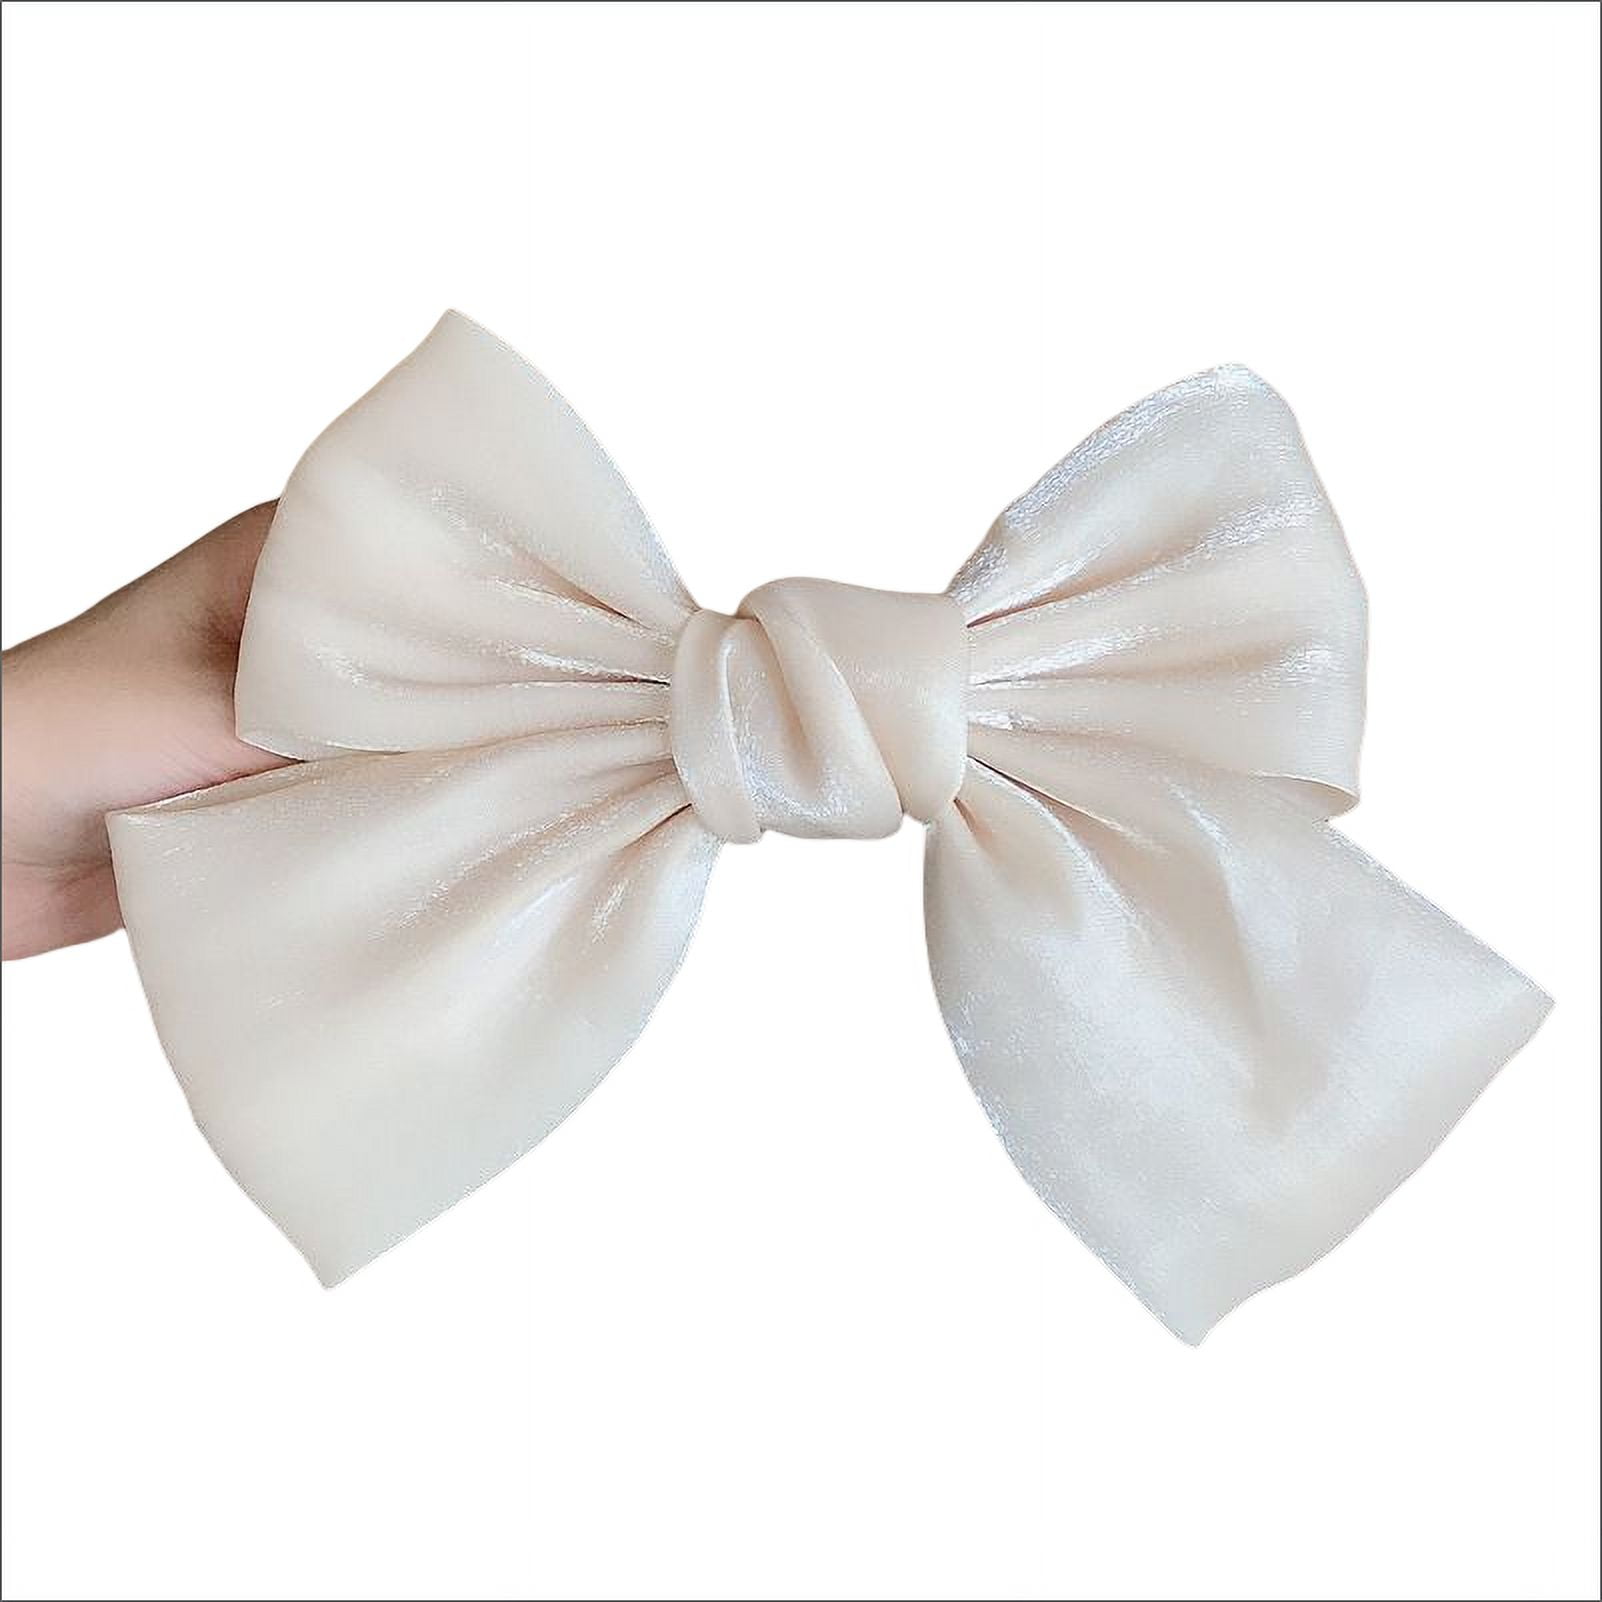 YALLNASL Large Bow Hair Clip Barrette Hair Bows Satin Solid Handmade Hair Clips Barrettes for Thick Hair Accessories for Women Girls Red Hair Bow French